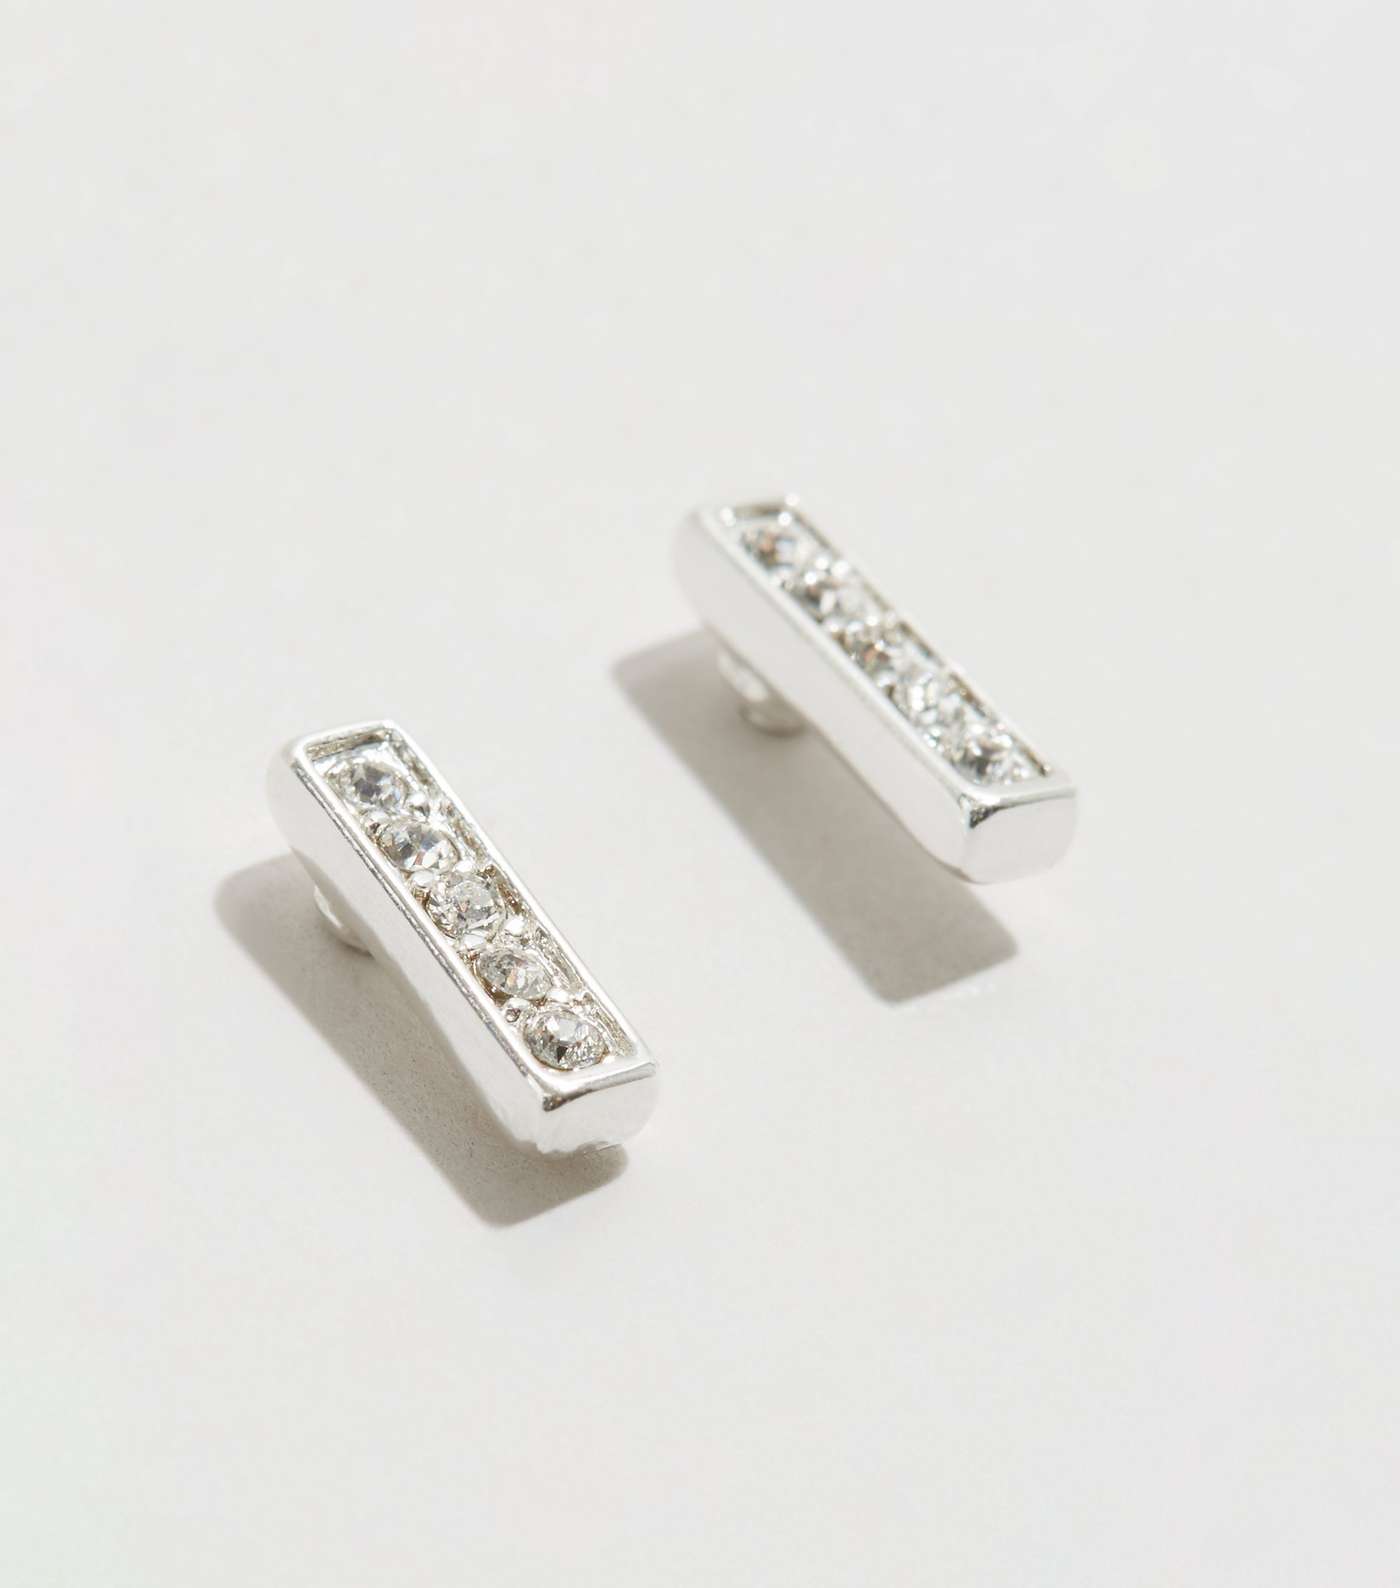 Silver Plated Stick Stud Earrings with Crystals from Swarovski® Image 4